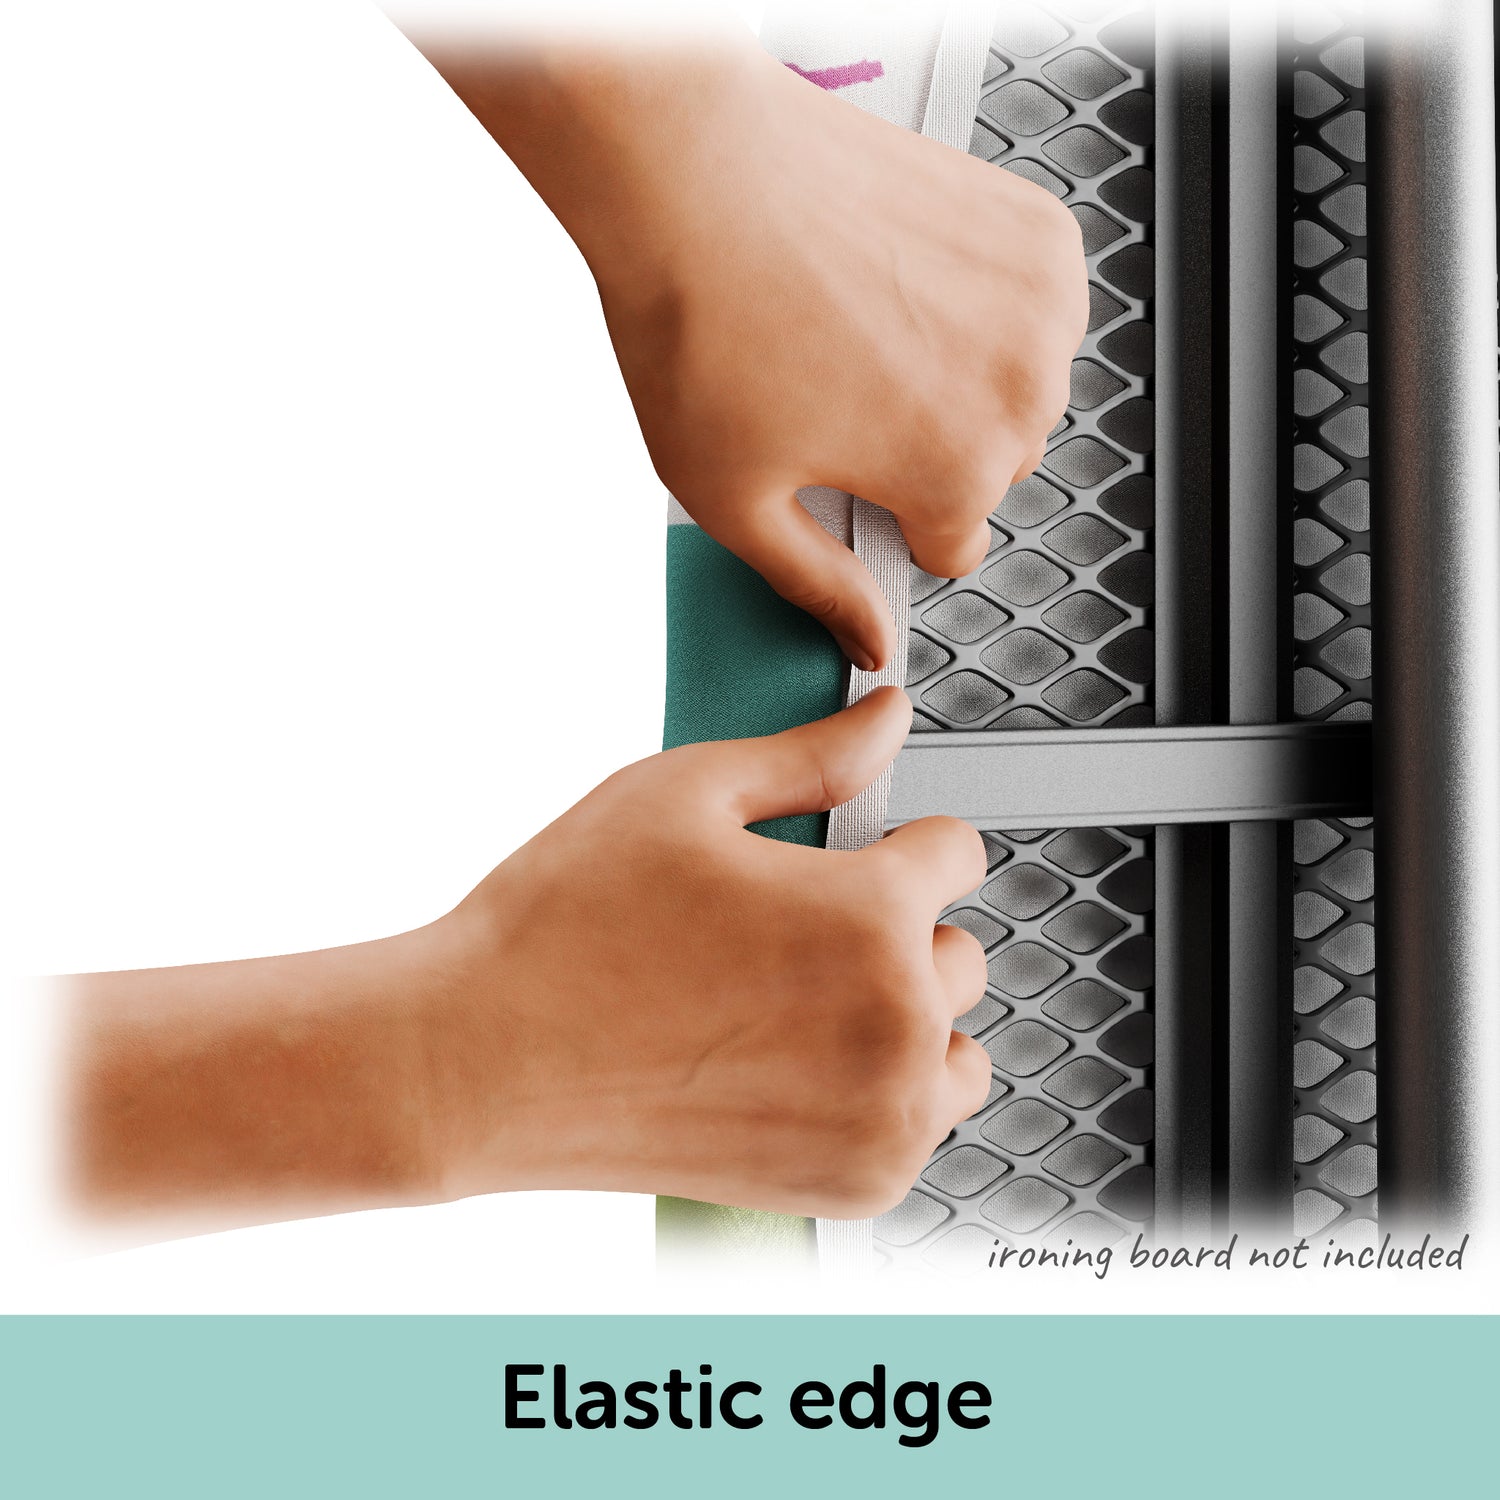 Hands stretching the elastic edge of the Olios ironing board cover that creates a snug fit.